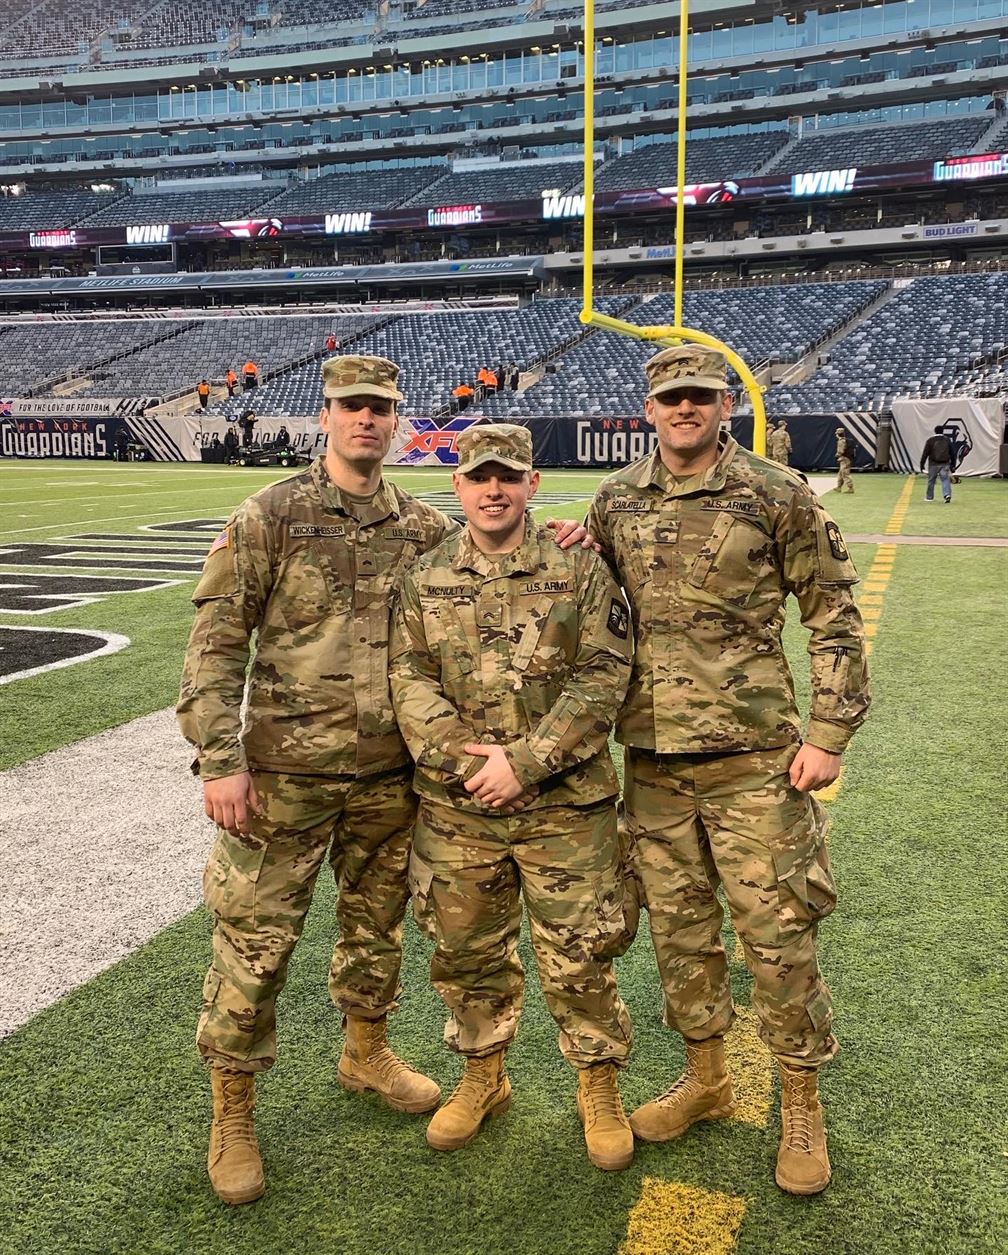 Scarlatella and two cadet classmates being honored at MetLife Stadium. Photo courtesy of Vinny Scarlatella